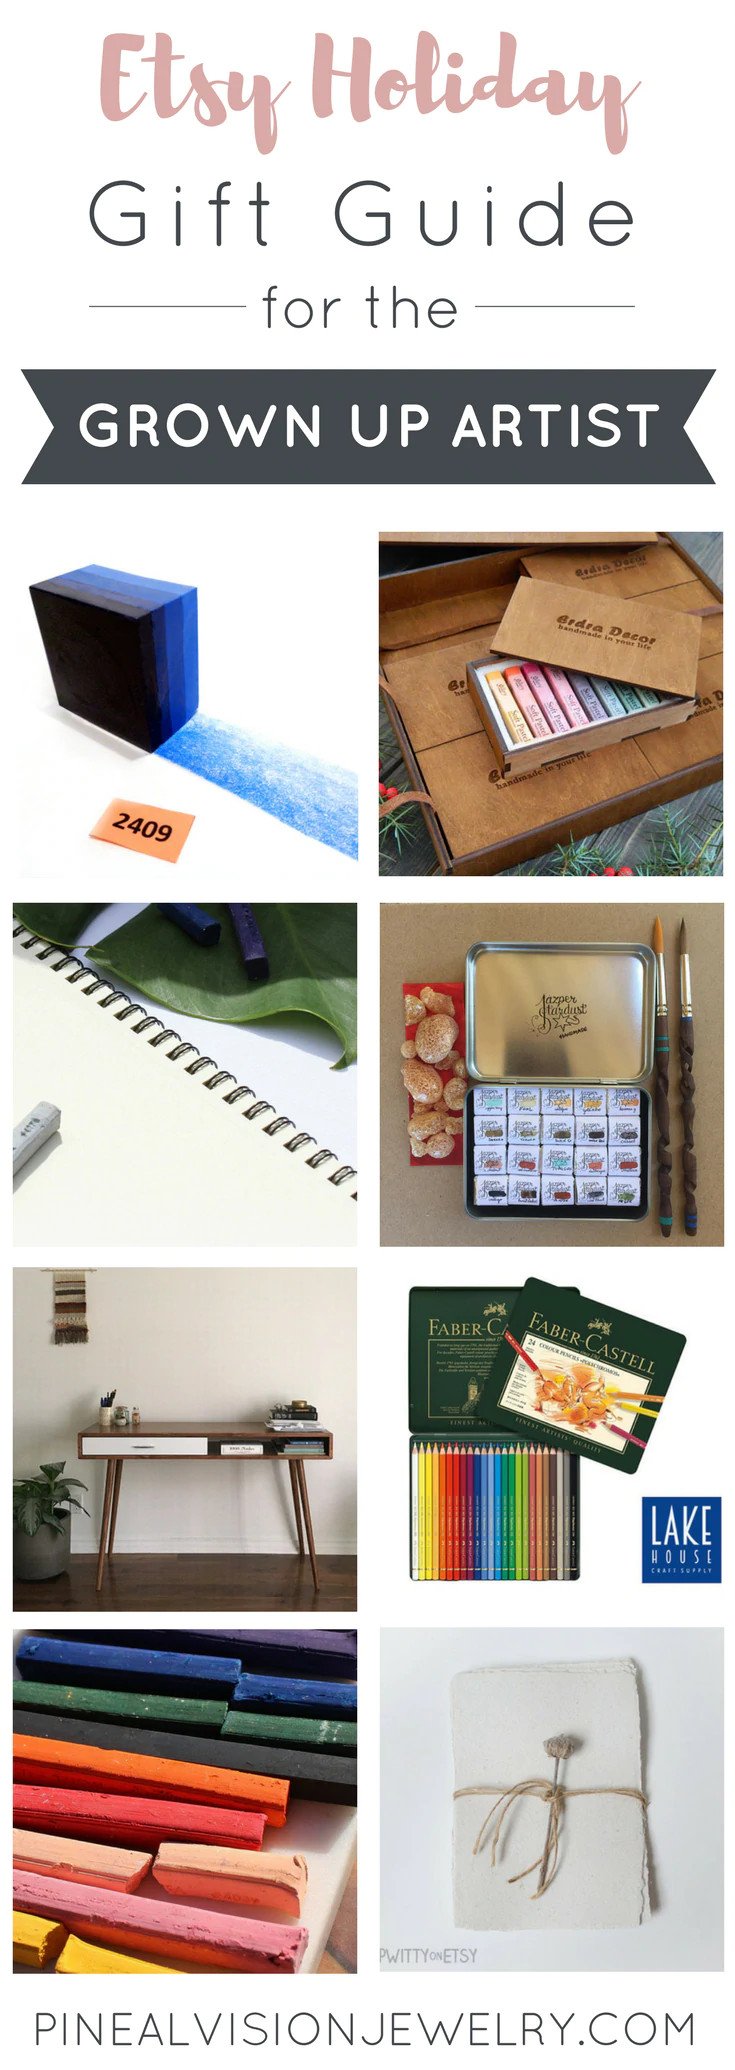 Photo collage of art supplies from Etsy.